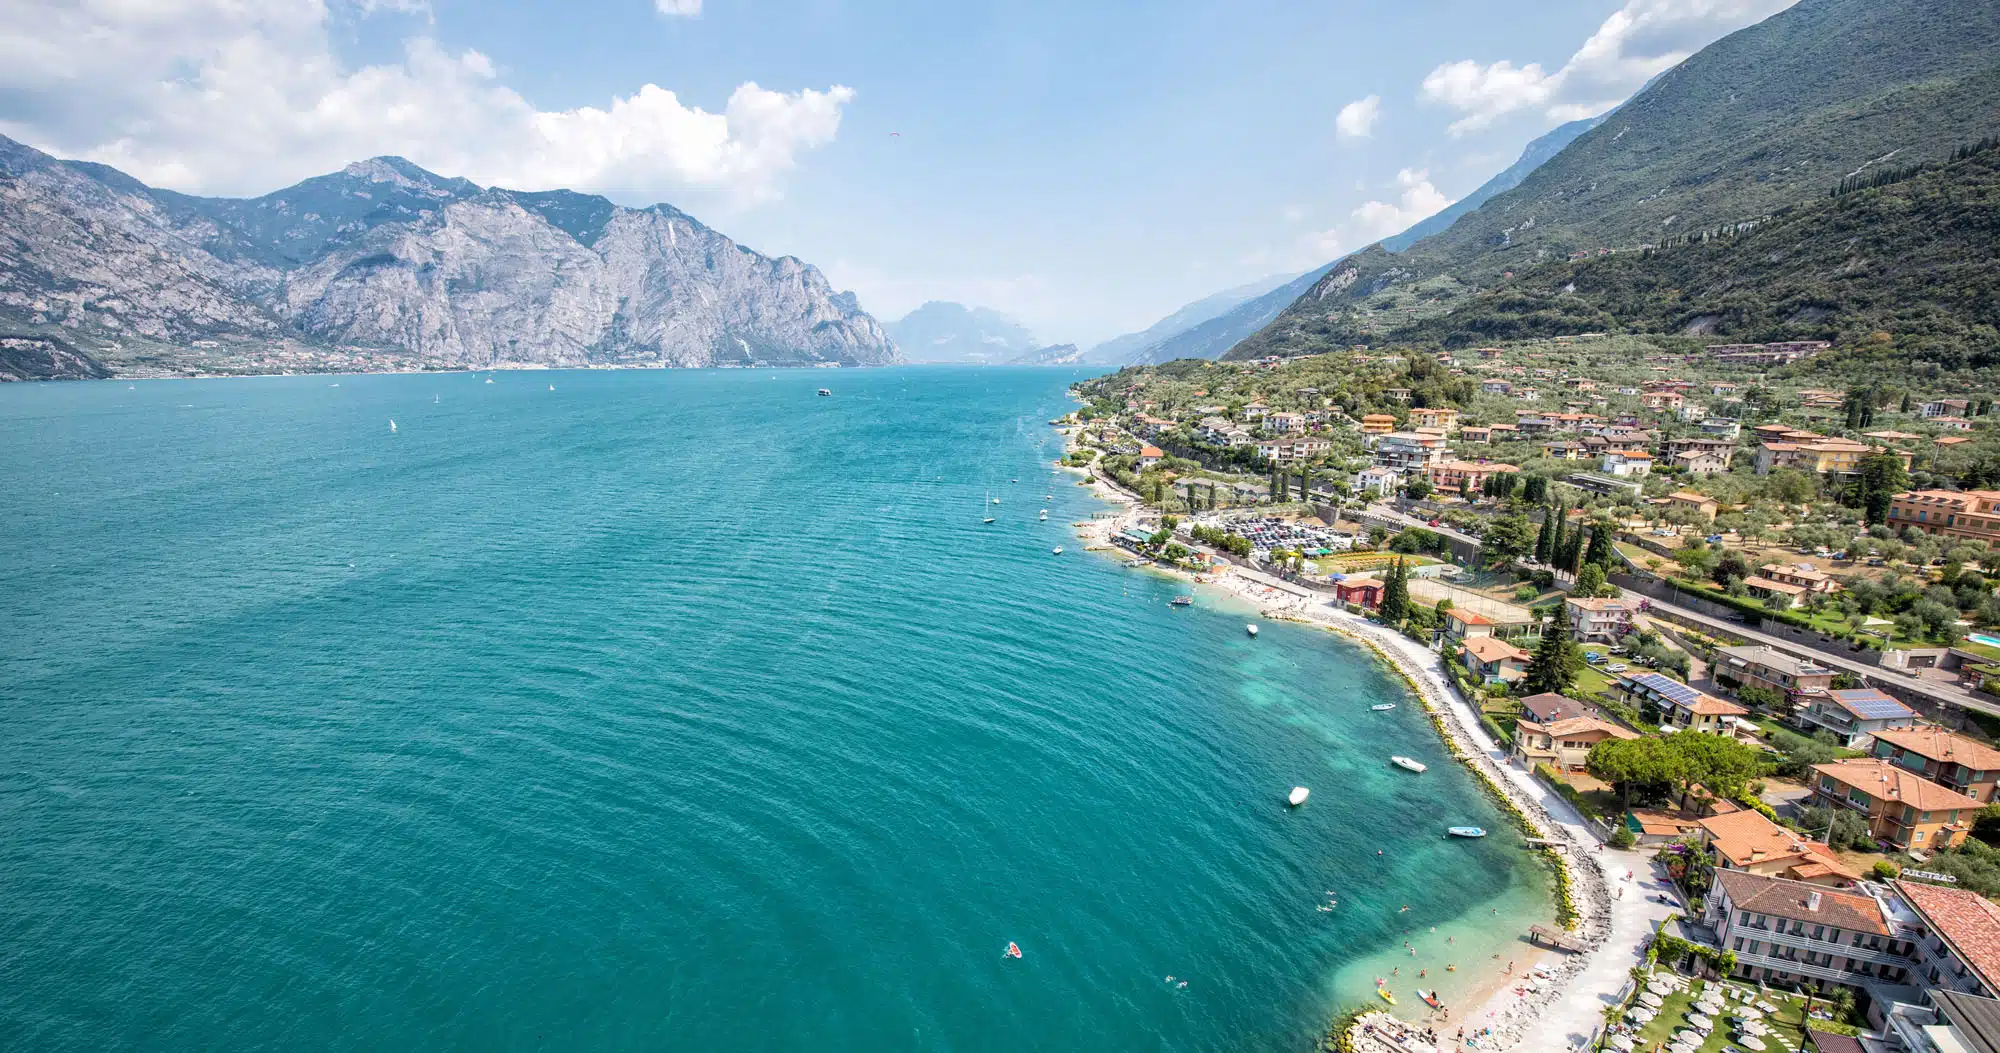 Featured image for “Lake Garda Itinerary: The Best Way to Spend 1 to 4 Days in Lake Garda”